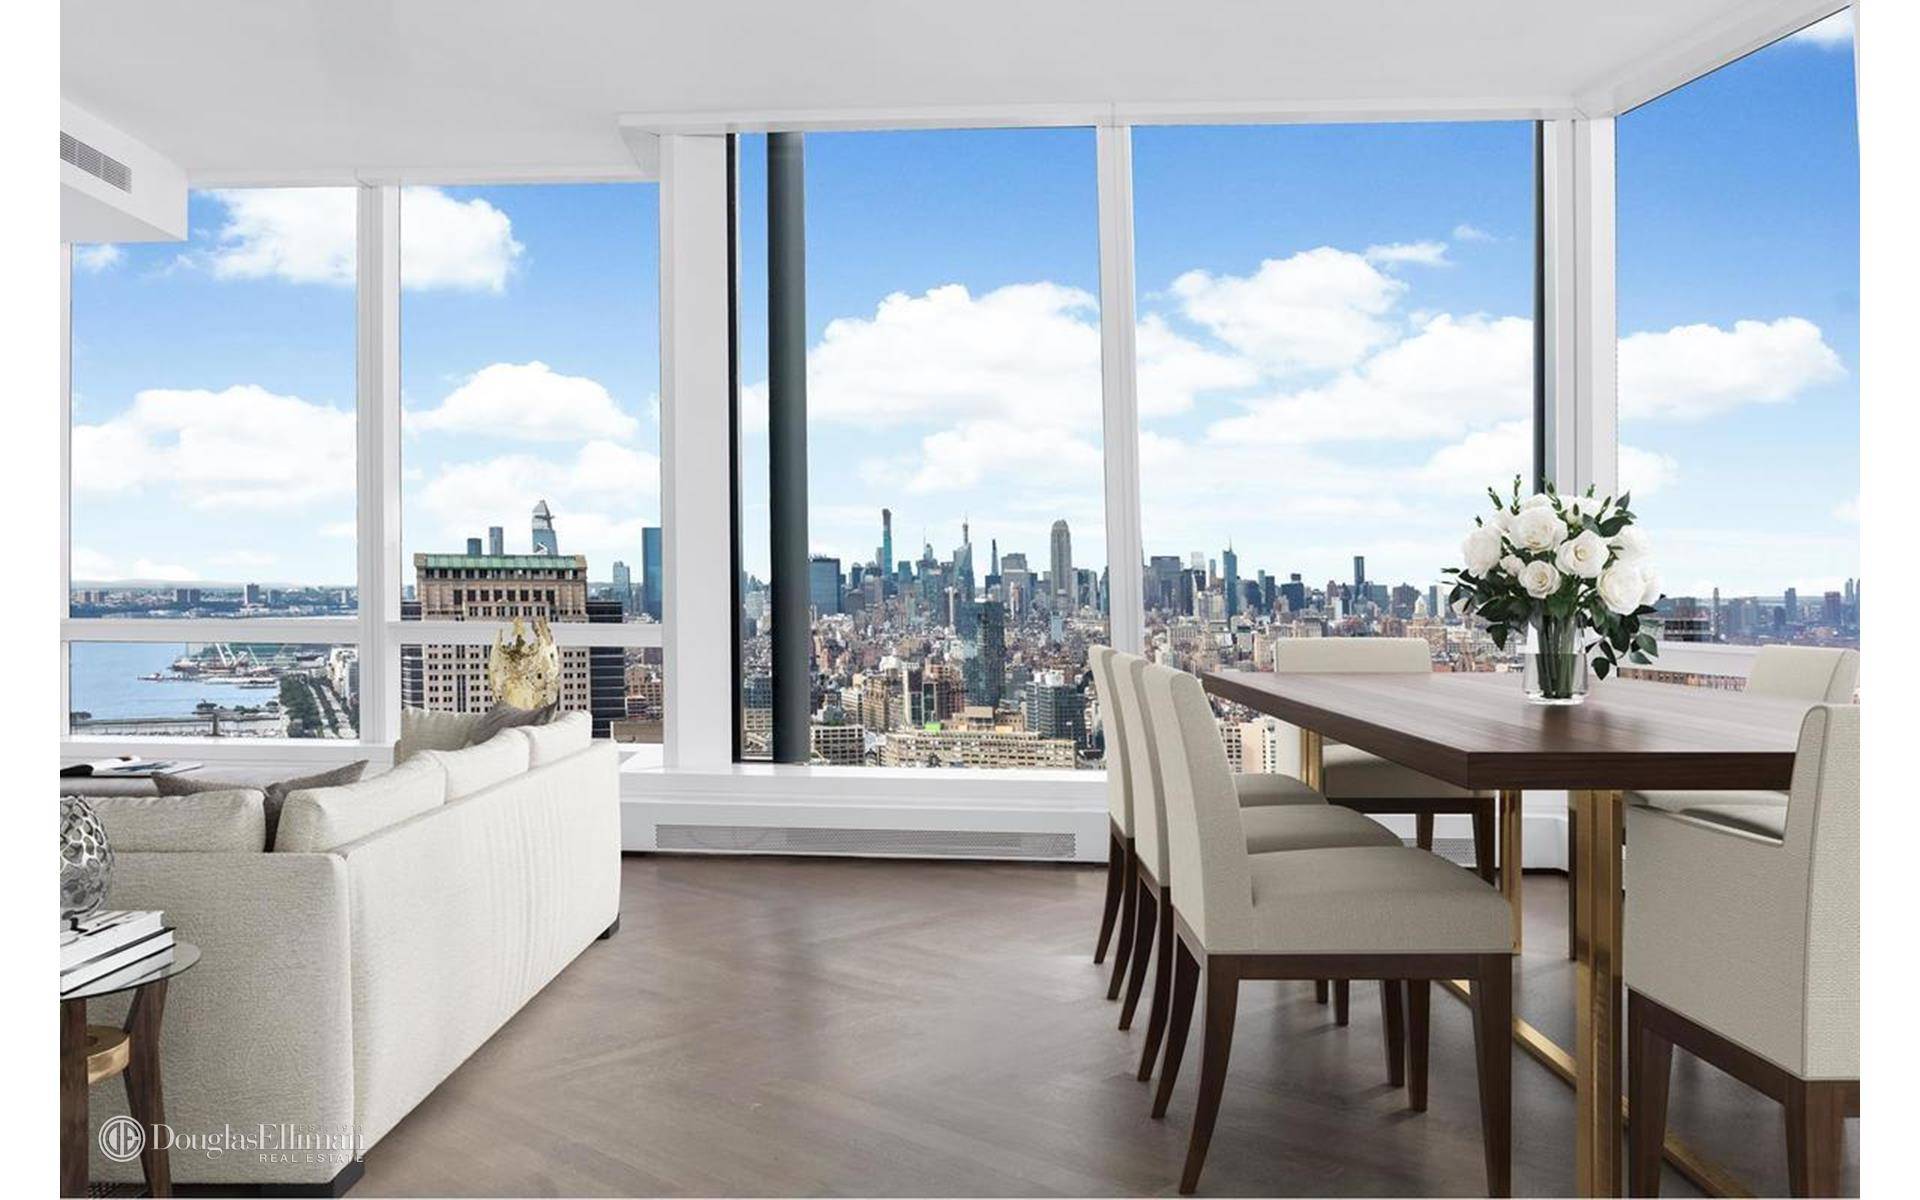 Sitting at the crossroads of downtown Manhattan and New York luxury real estate, this transcendent, 49th floor residence is like no other.